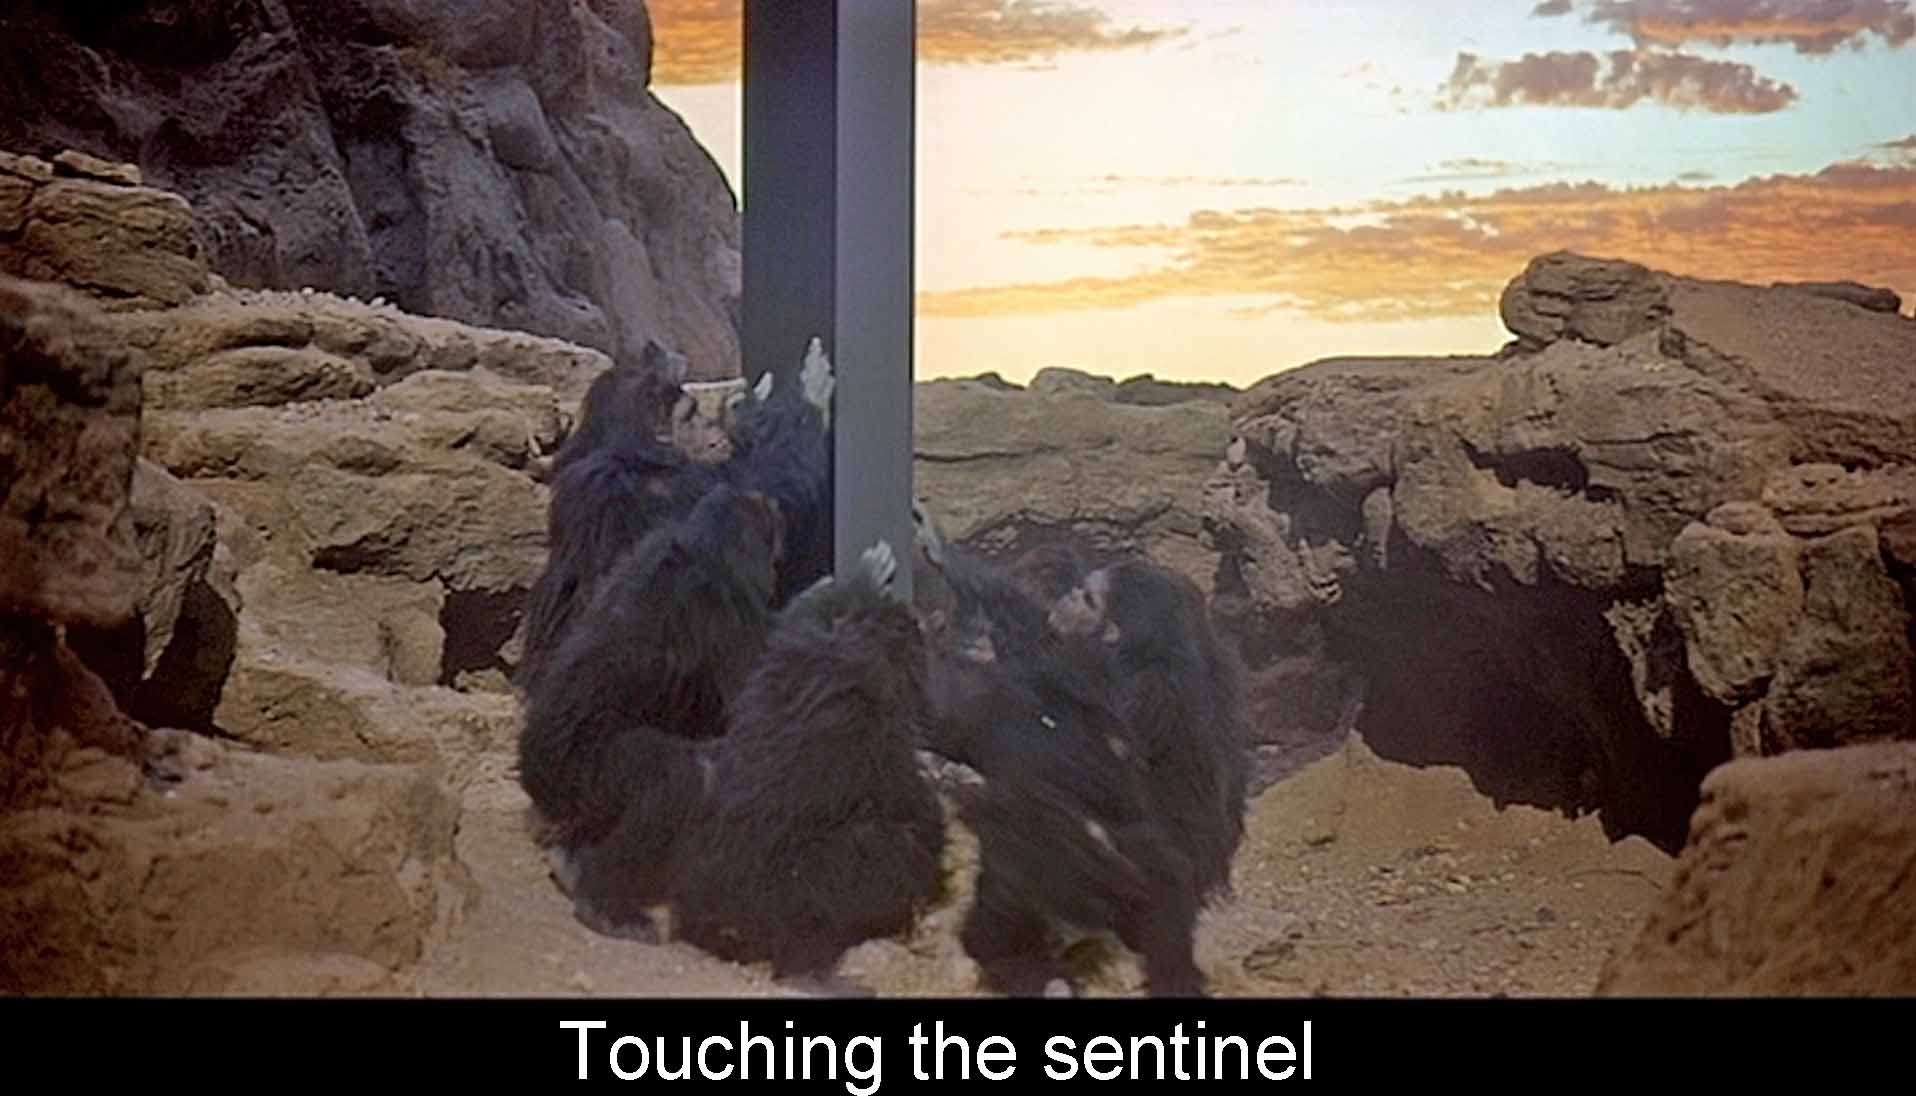 Touching the sentinel